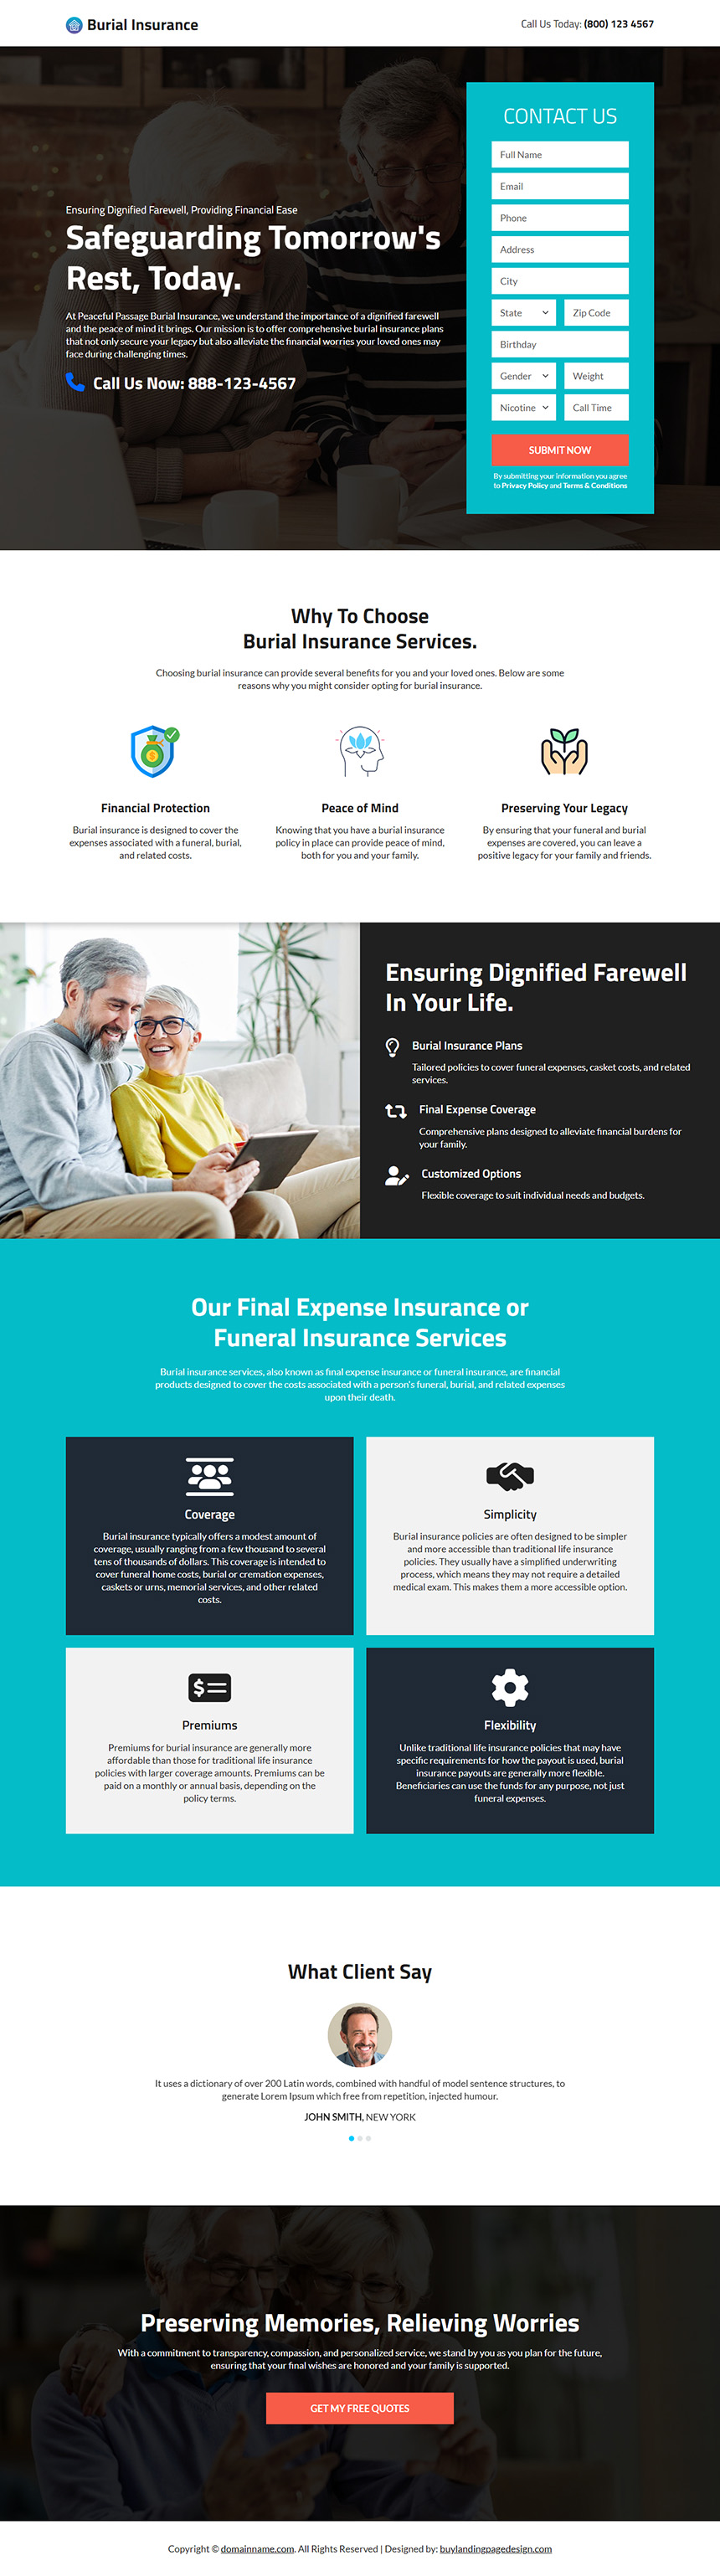 funeral insurance service responsive landing page